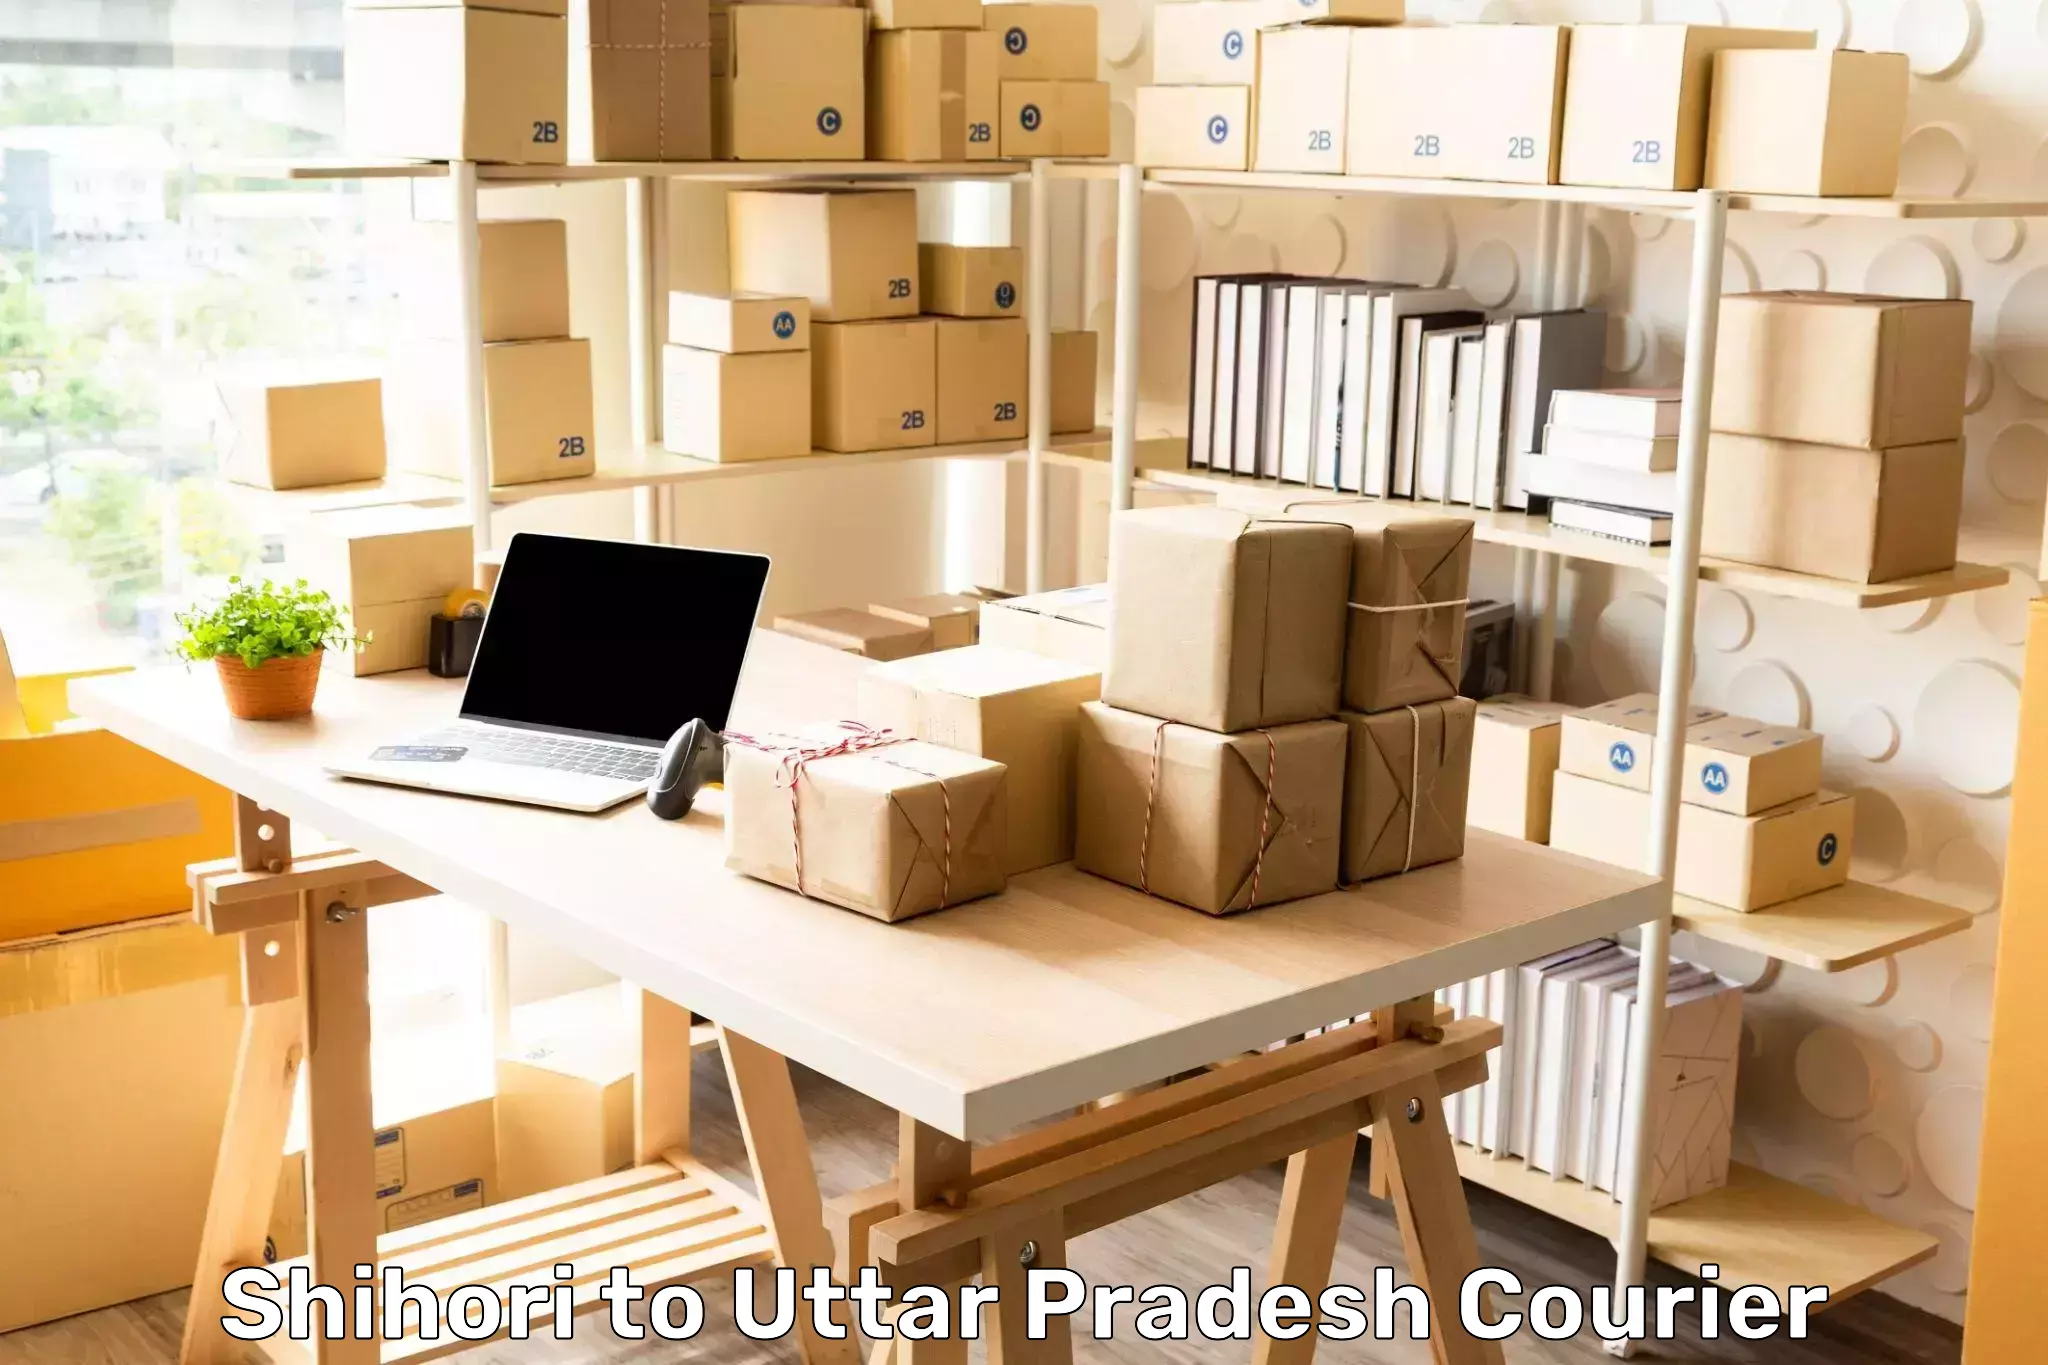 Full-service courier options Shihori to Anupshahar